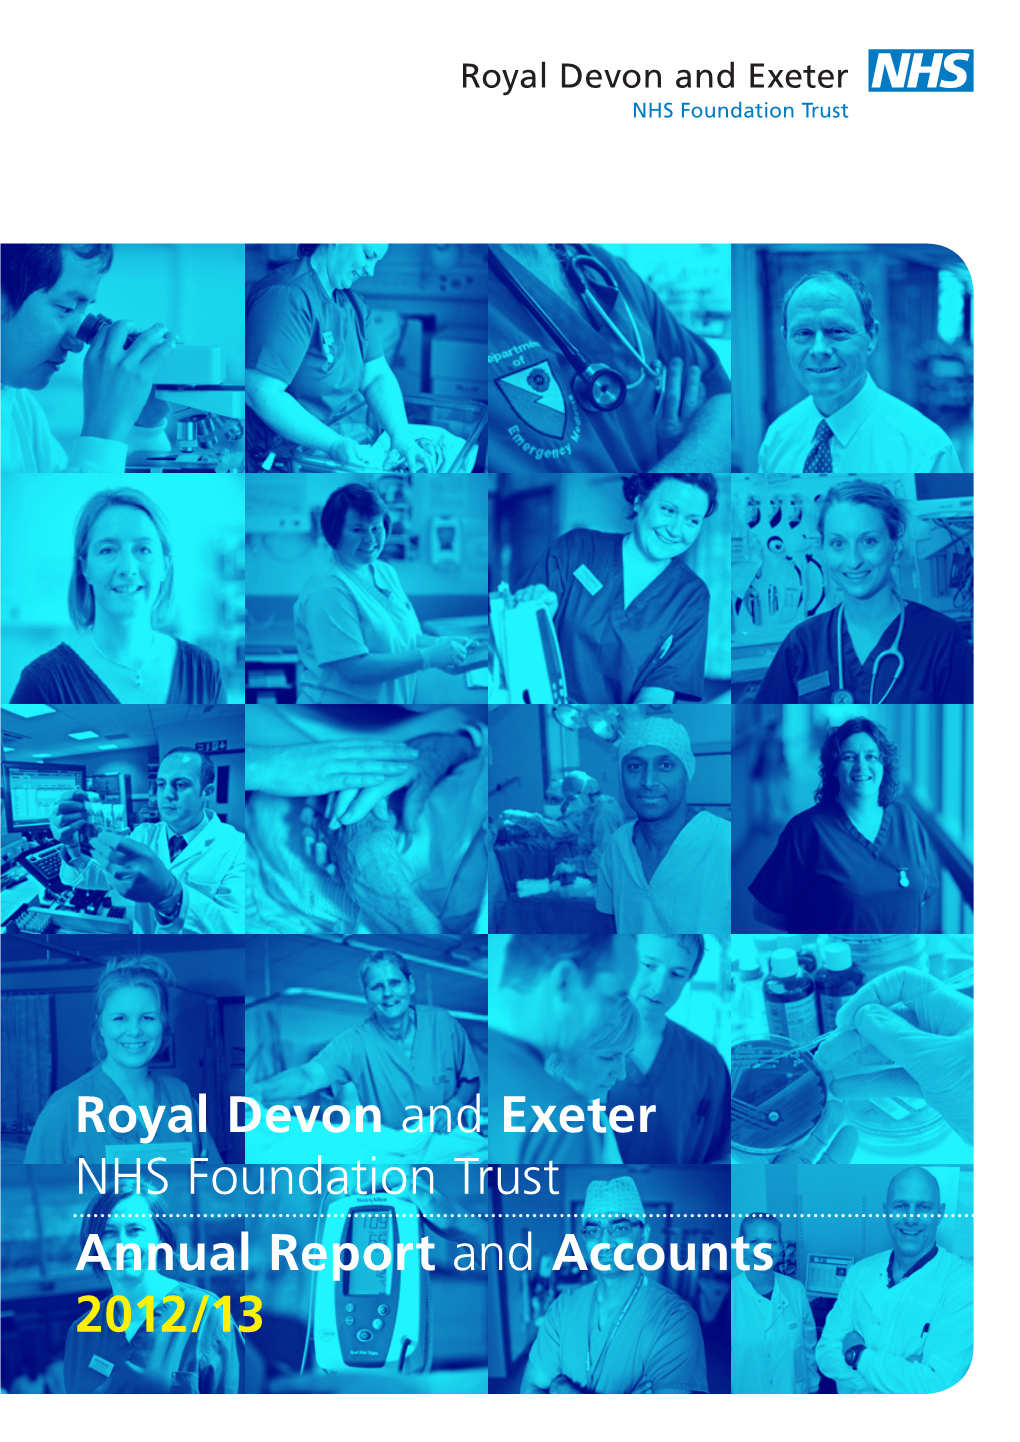 Royal Devon and Exeter NHS Foundation Trust Annual Report and Accounts 2012/13